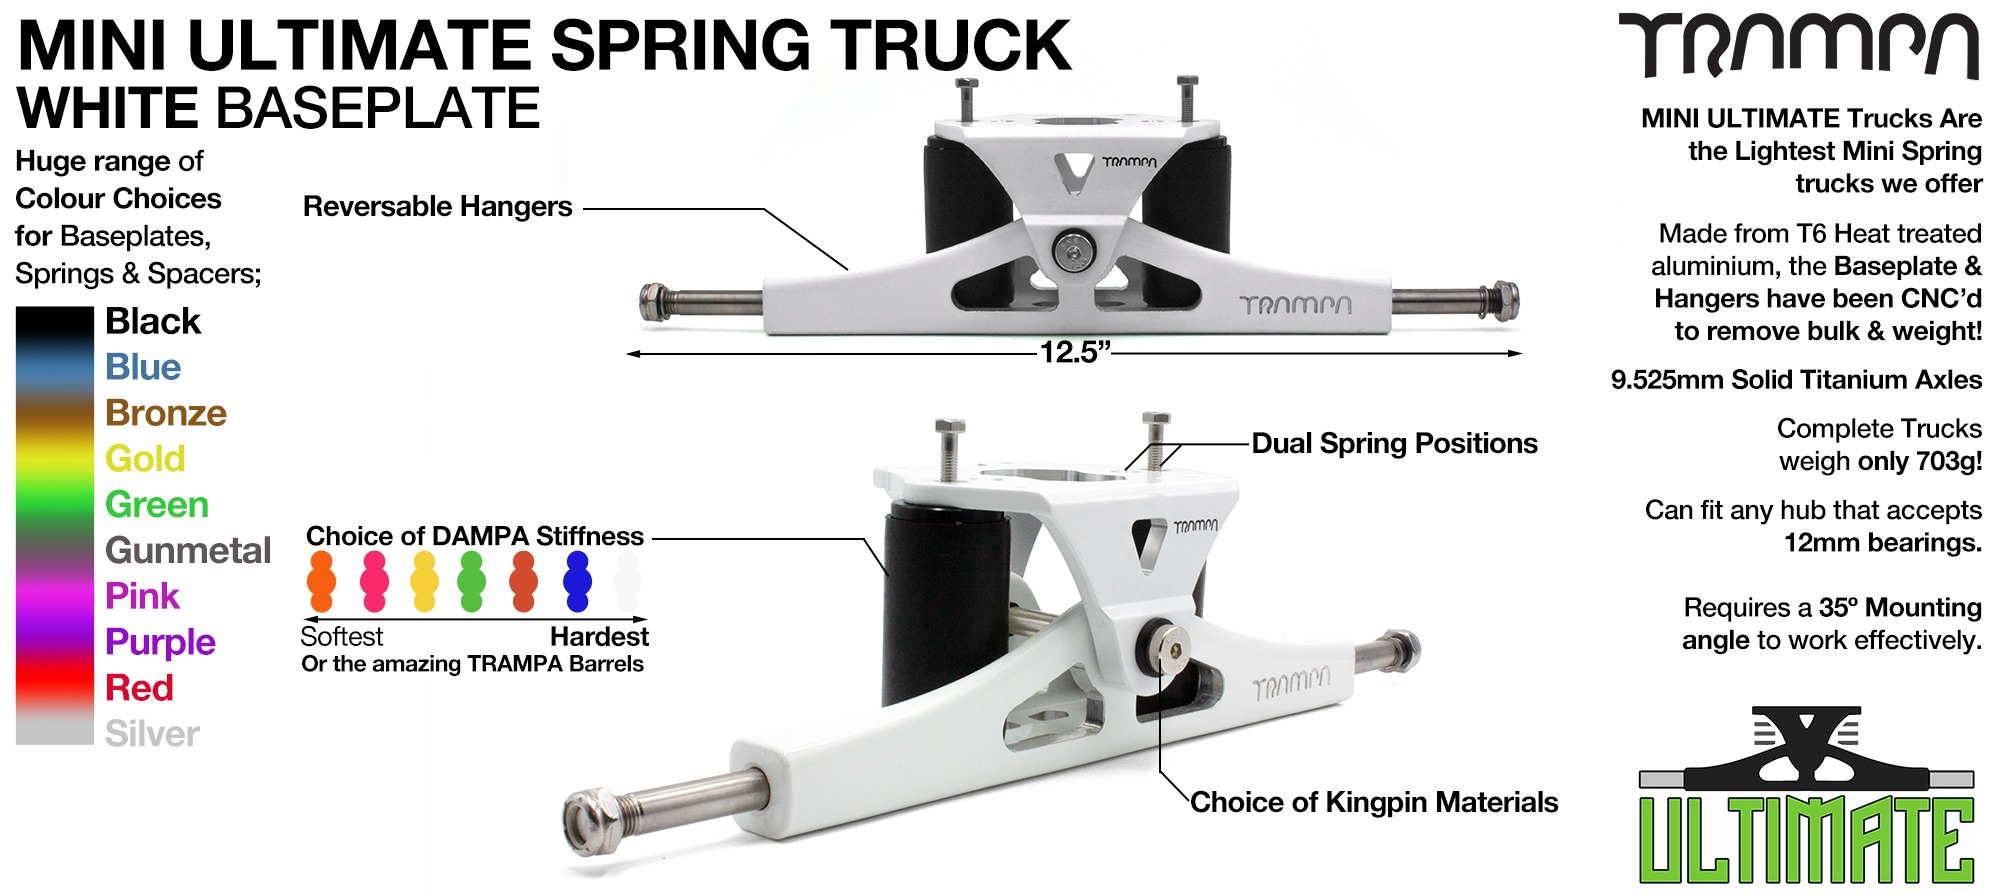 Mini ULTIMATE TRAMPA TRUCKS - CNC FORGED Channel Hanger with 9.525mm TITANIUM Axle CNC Baseplate TITANIUM Kingpin - WHITE